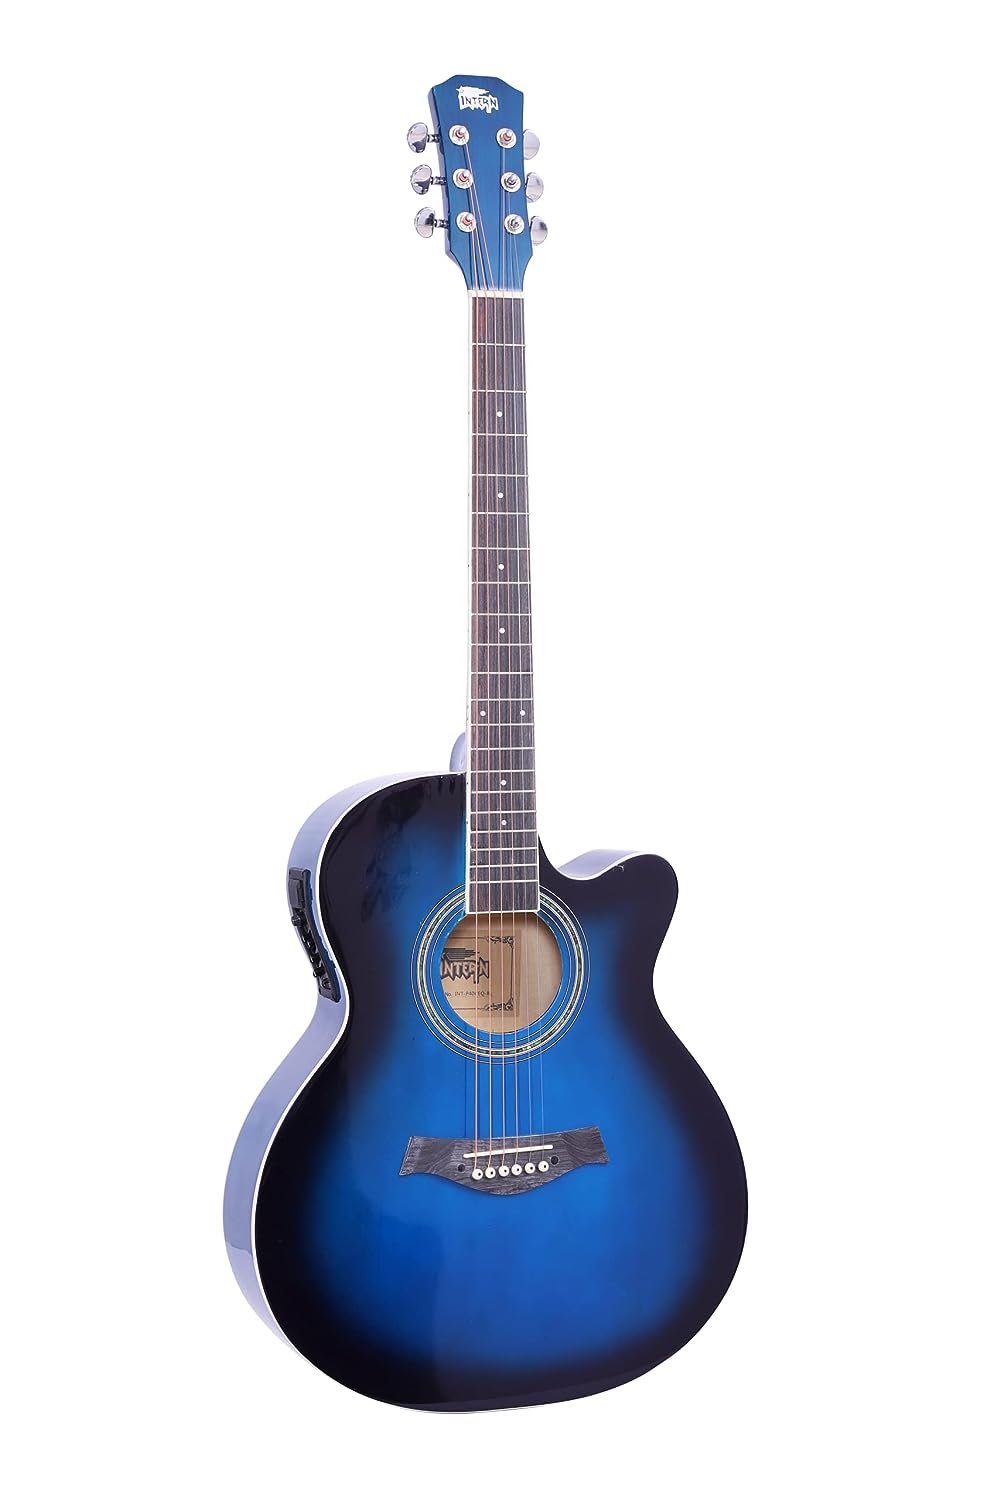 INTERN 40 inches Acoustic Guitar with Pick-up & truss rod, carry bag, strings pack, strap & picks. Premium Wooden durable built, Best tonal stability with professional sound amplificaiton. (Blue).…